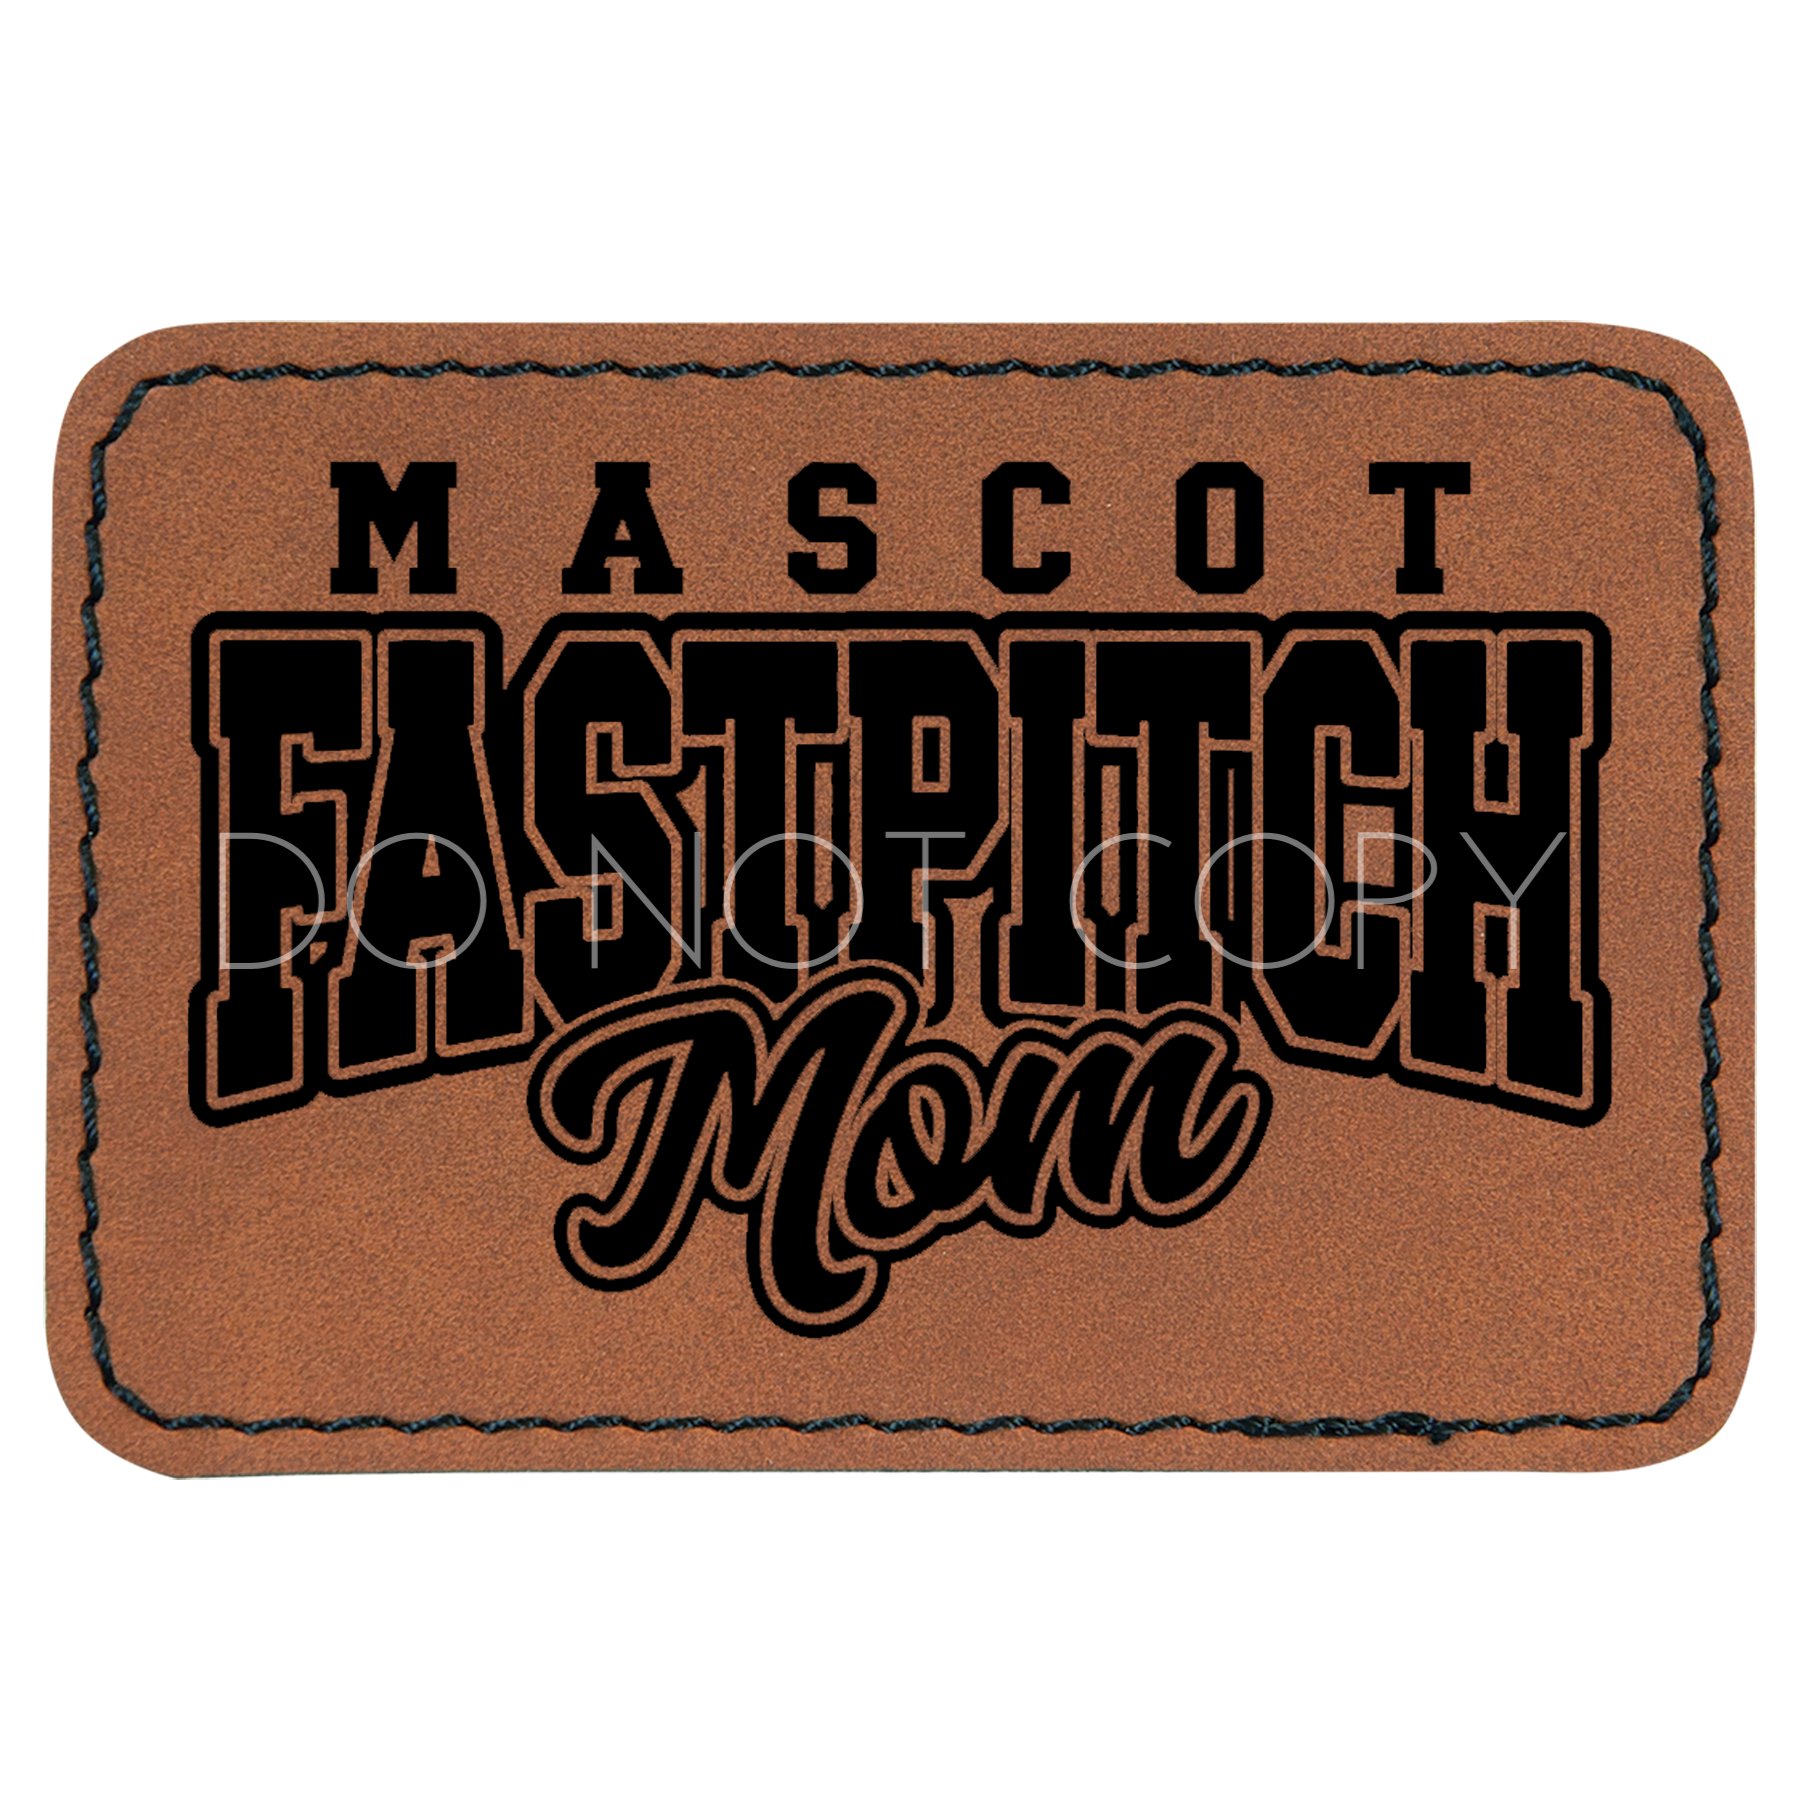 Mascot Fastpitch Mom Patch